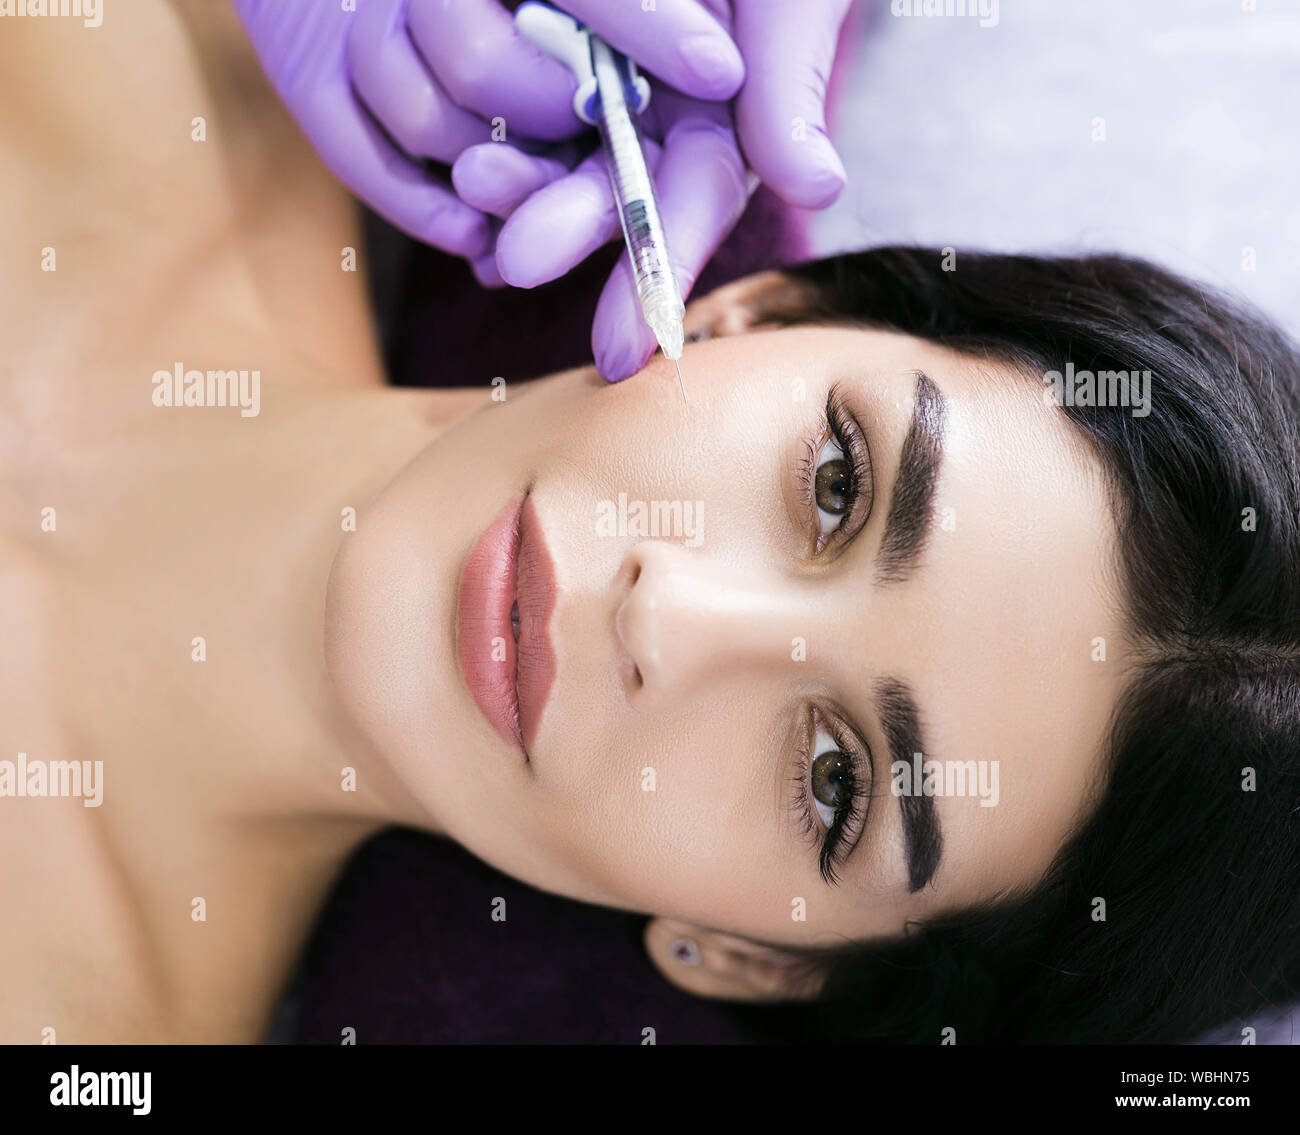 Beauty injections close up. A beautiful mid-aged brunette gets injections of beauty, anti wrinkles therapy, skin rejuvenation Stock Photo